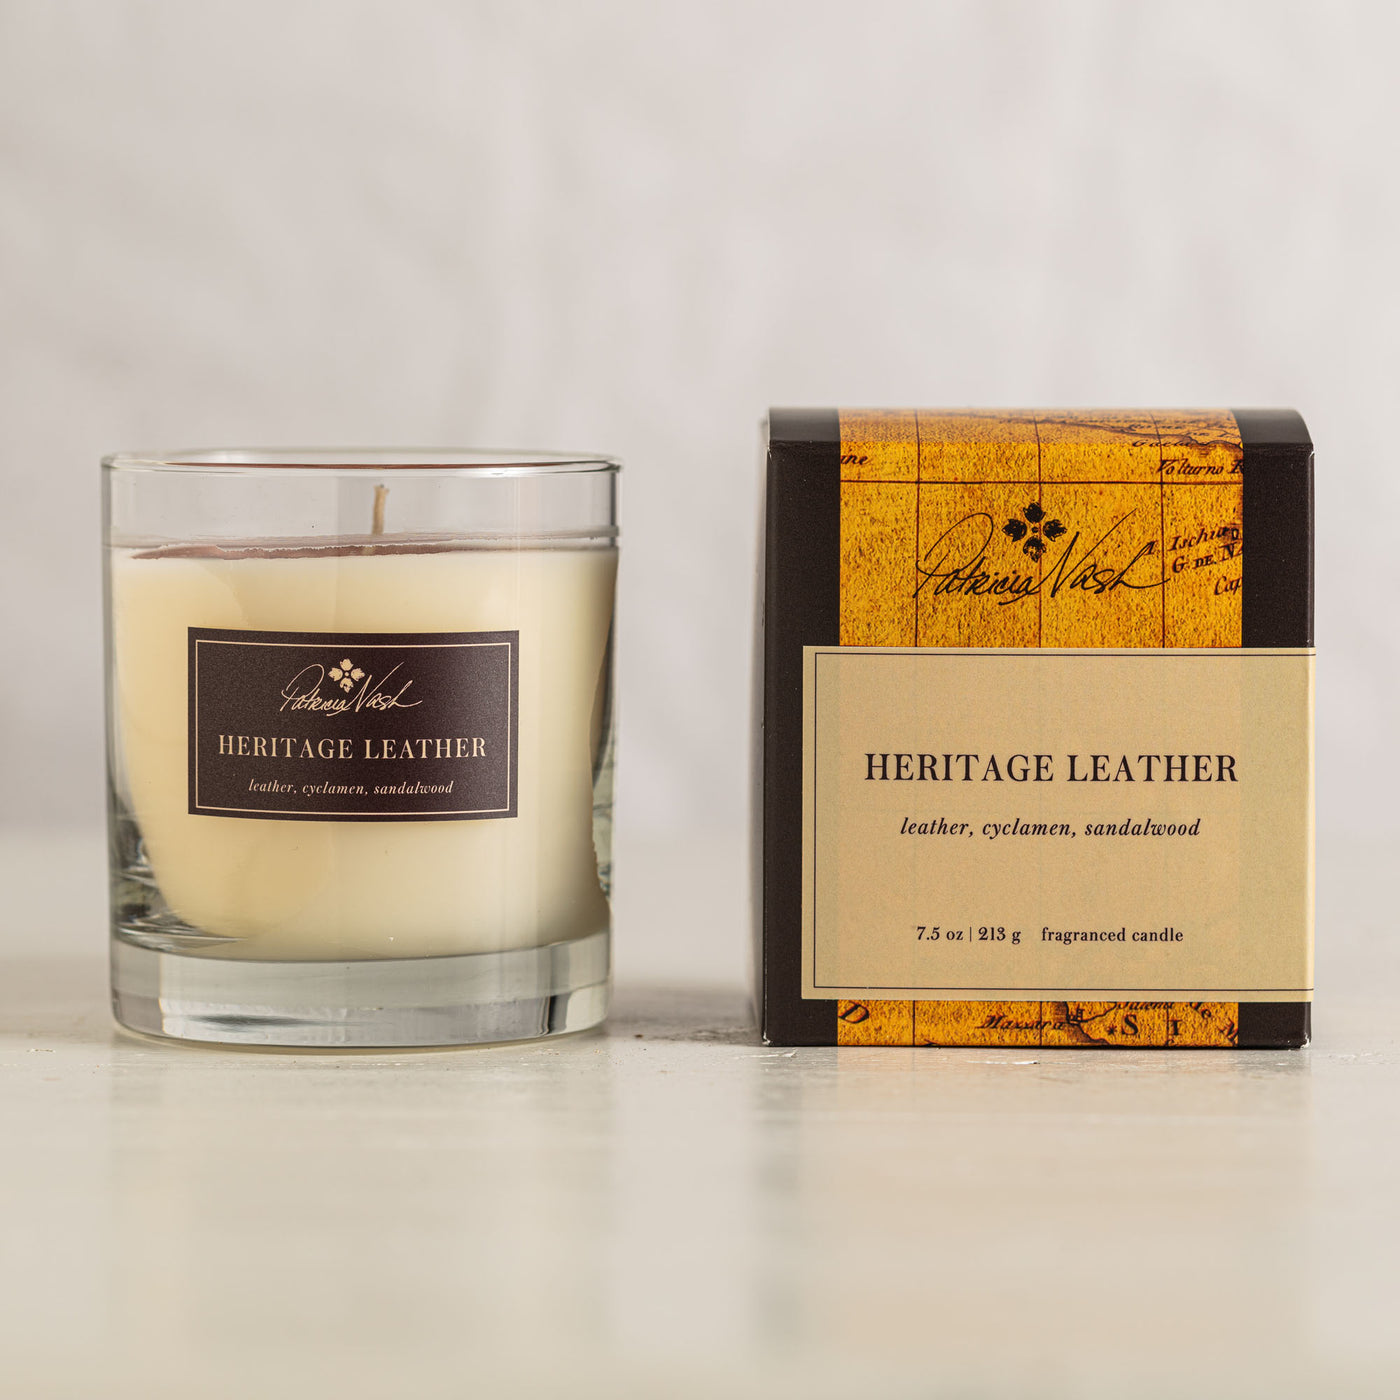 Patricia Nash Heritage Leather Candle